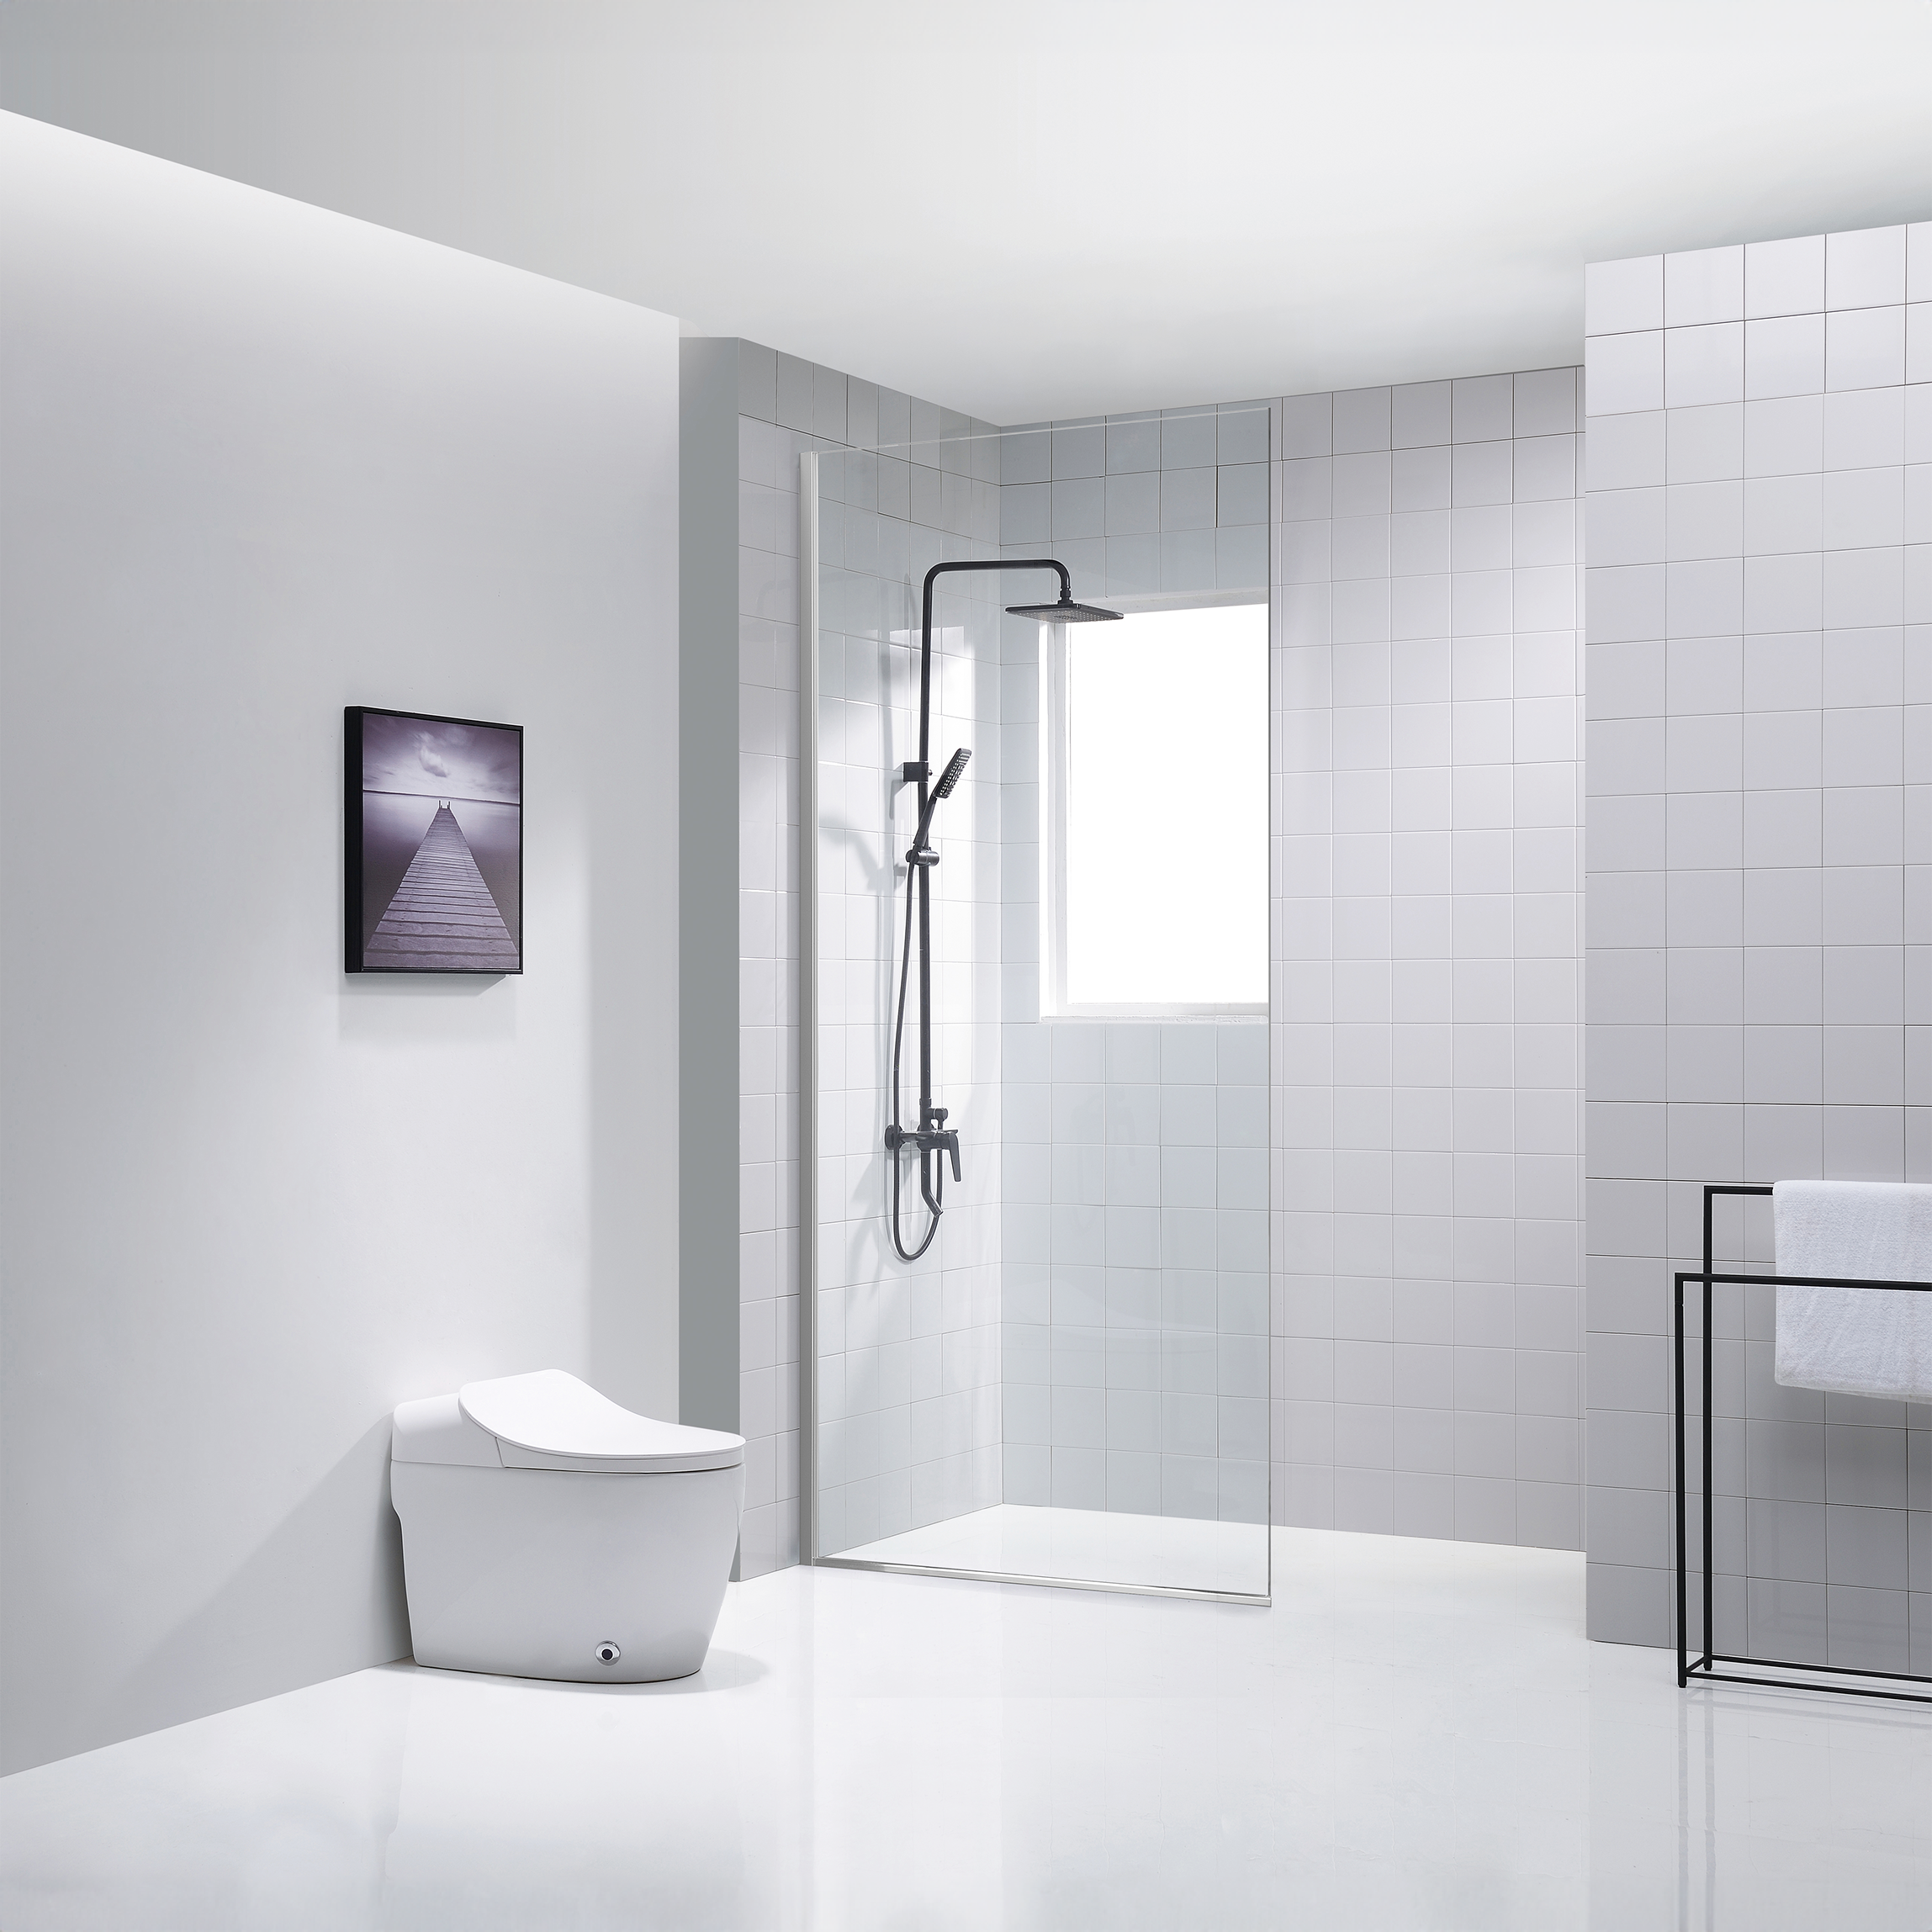 Dreamwerks 35.4"W x 79"H Frameless Fixed Shower Door in Chrome - Available in Clear or Frosted Glass - Dreamwerks